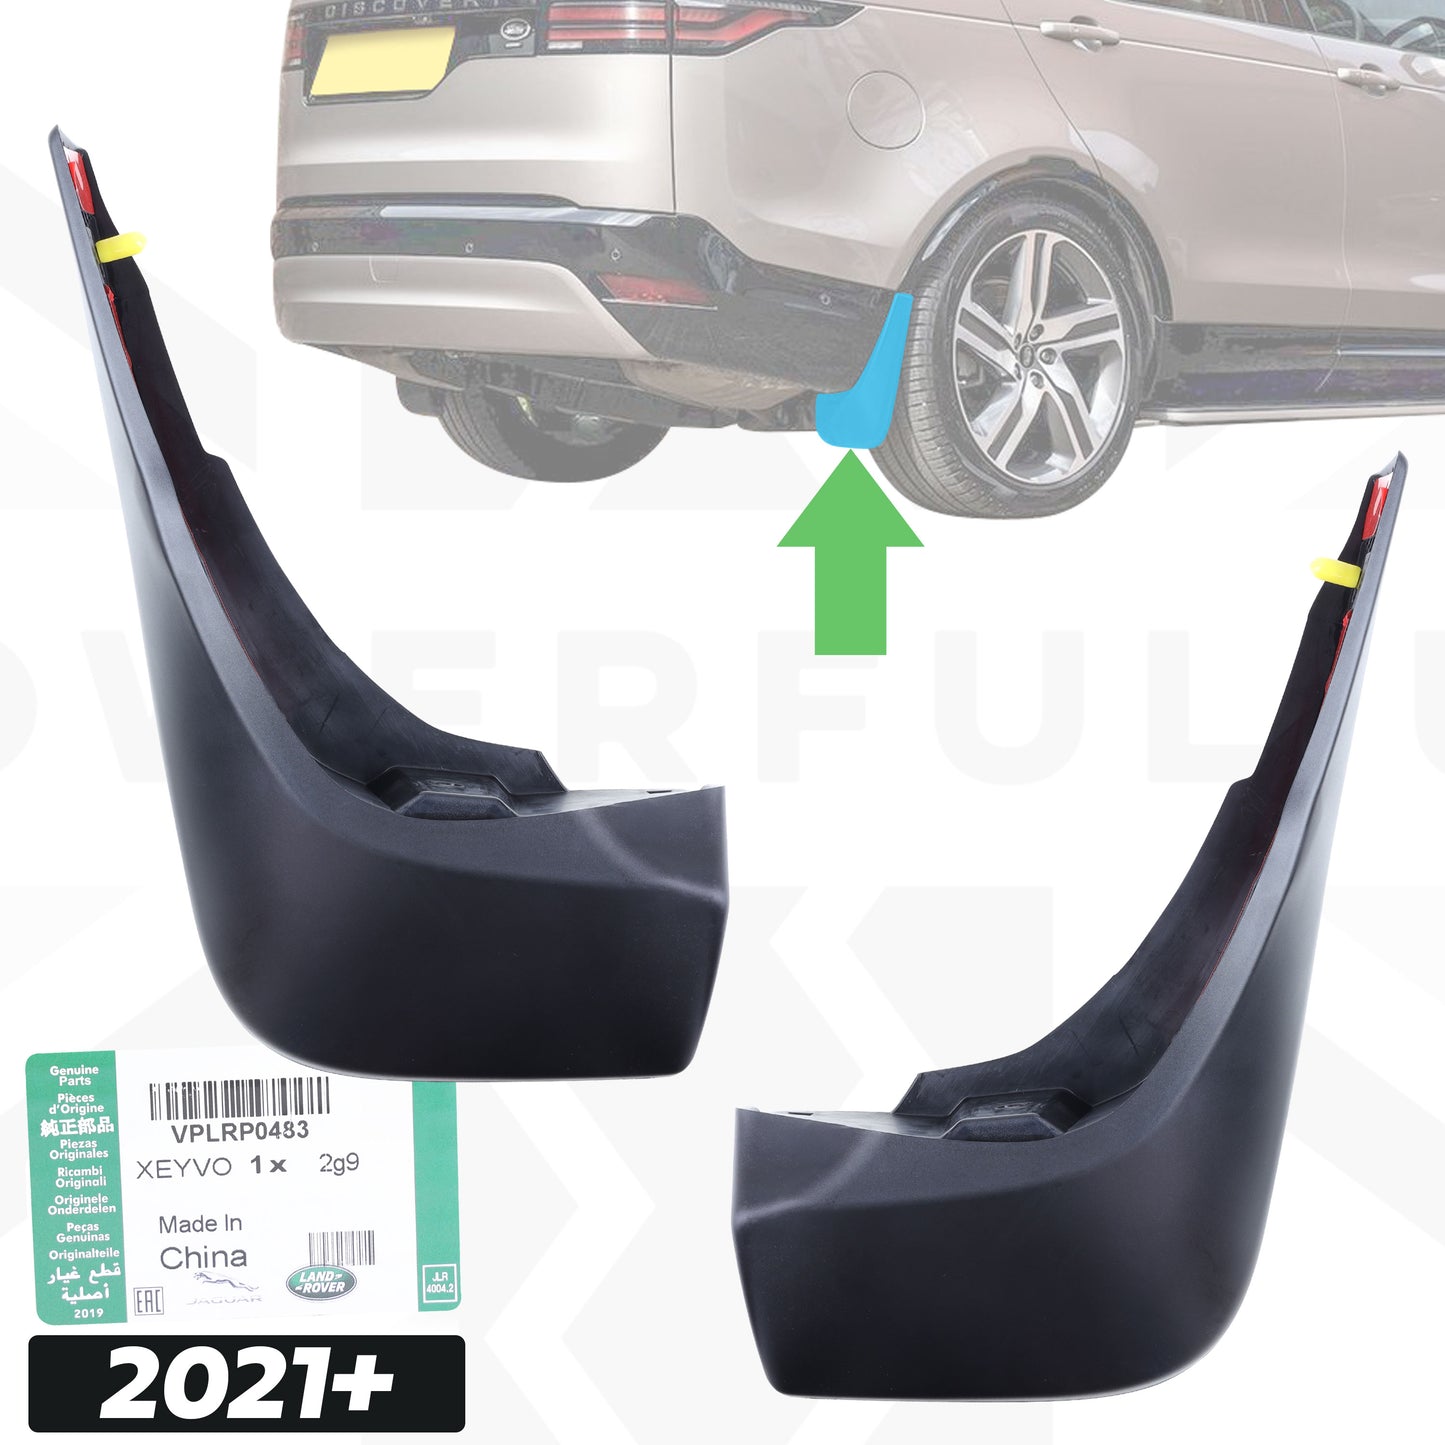 Genuine REAR Mudflaps for Land Rover Discovery 5 facelift 2021+